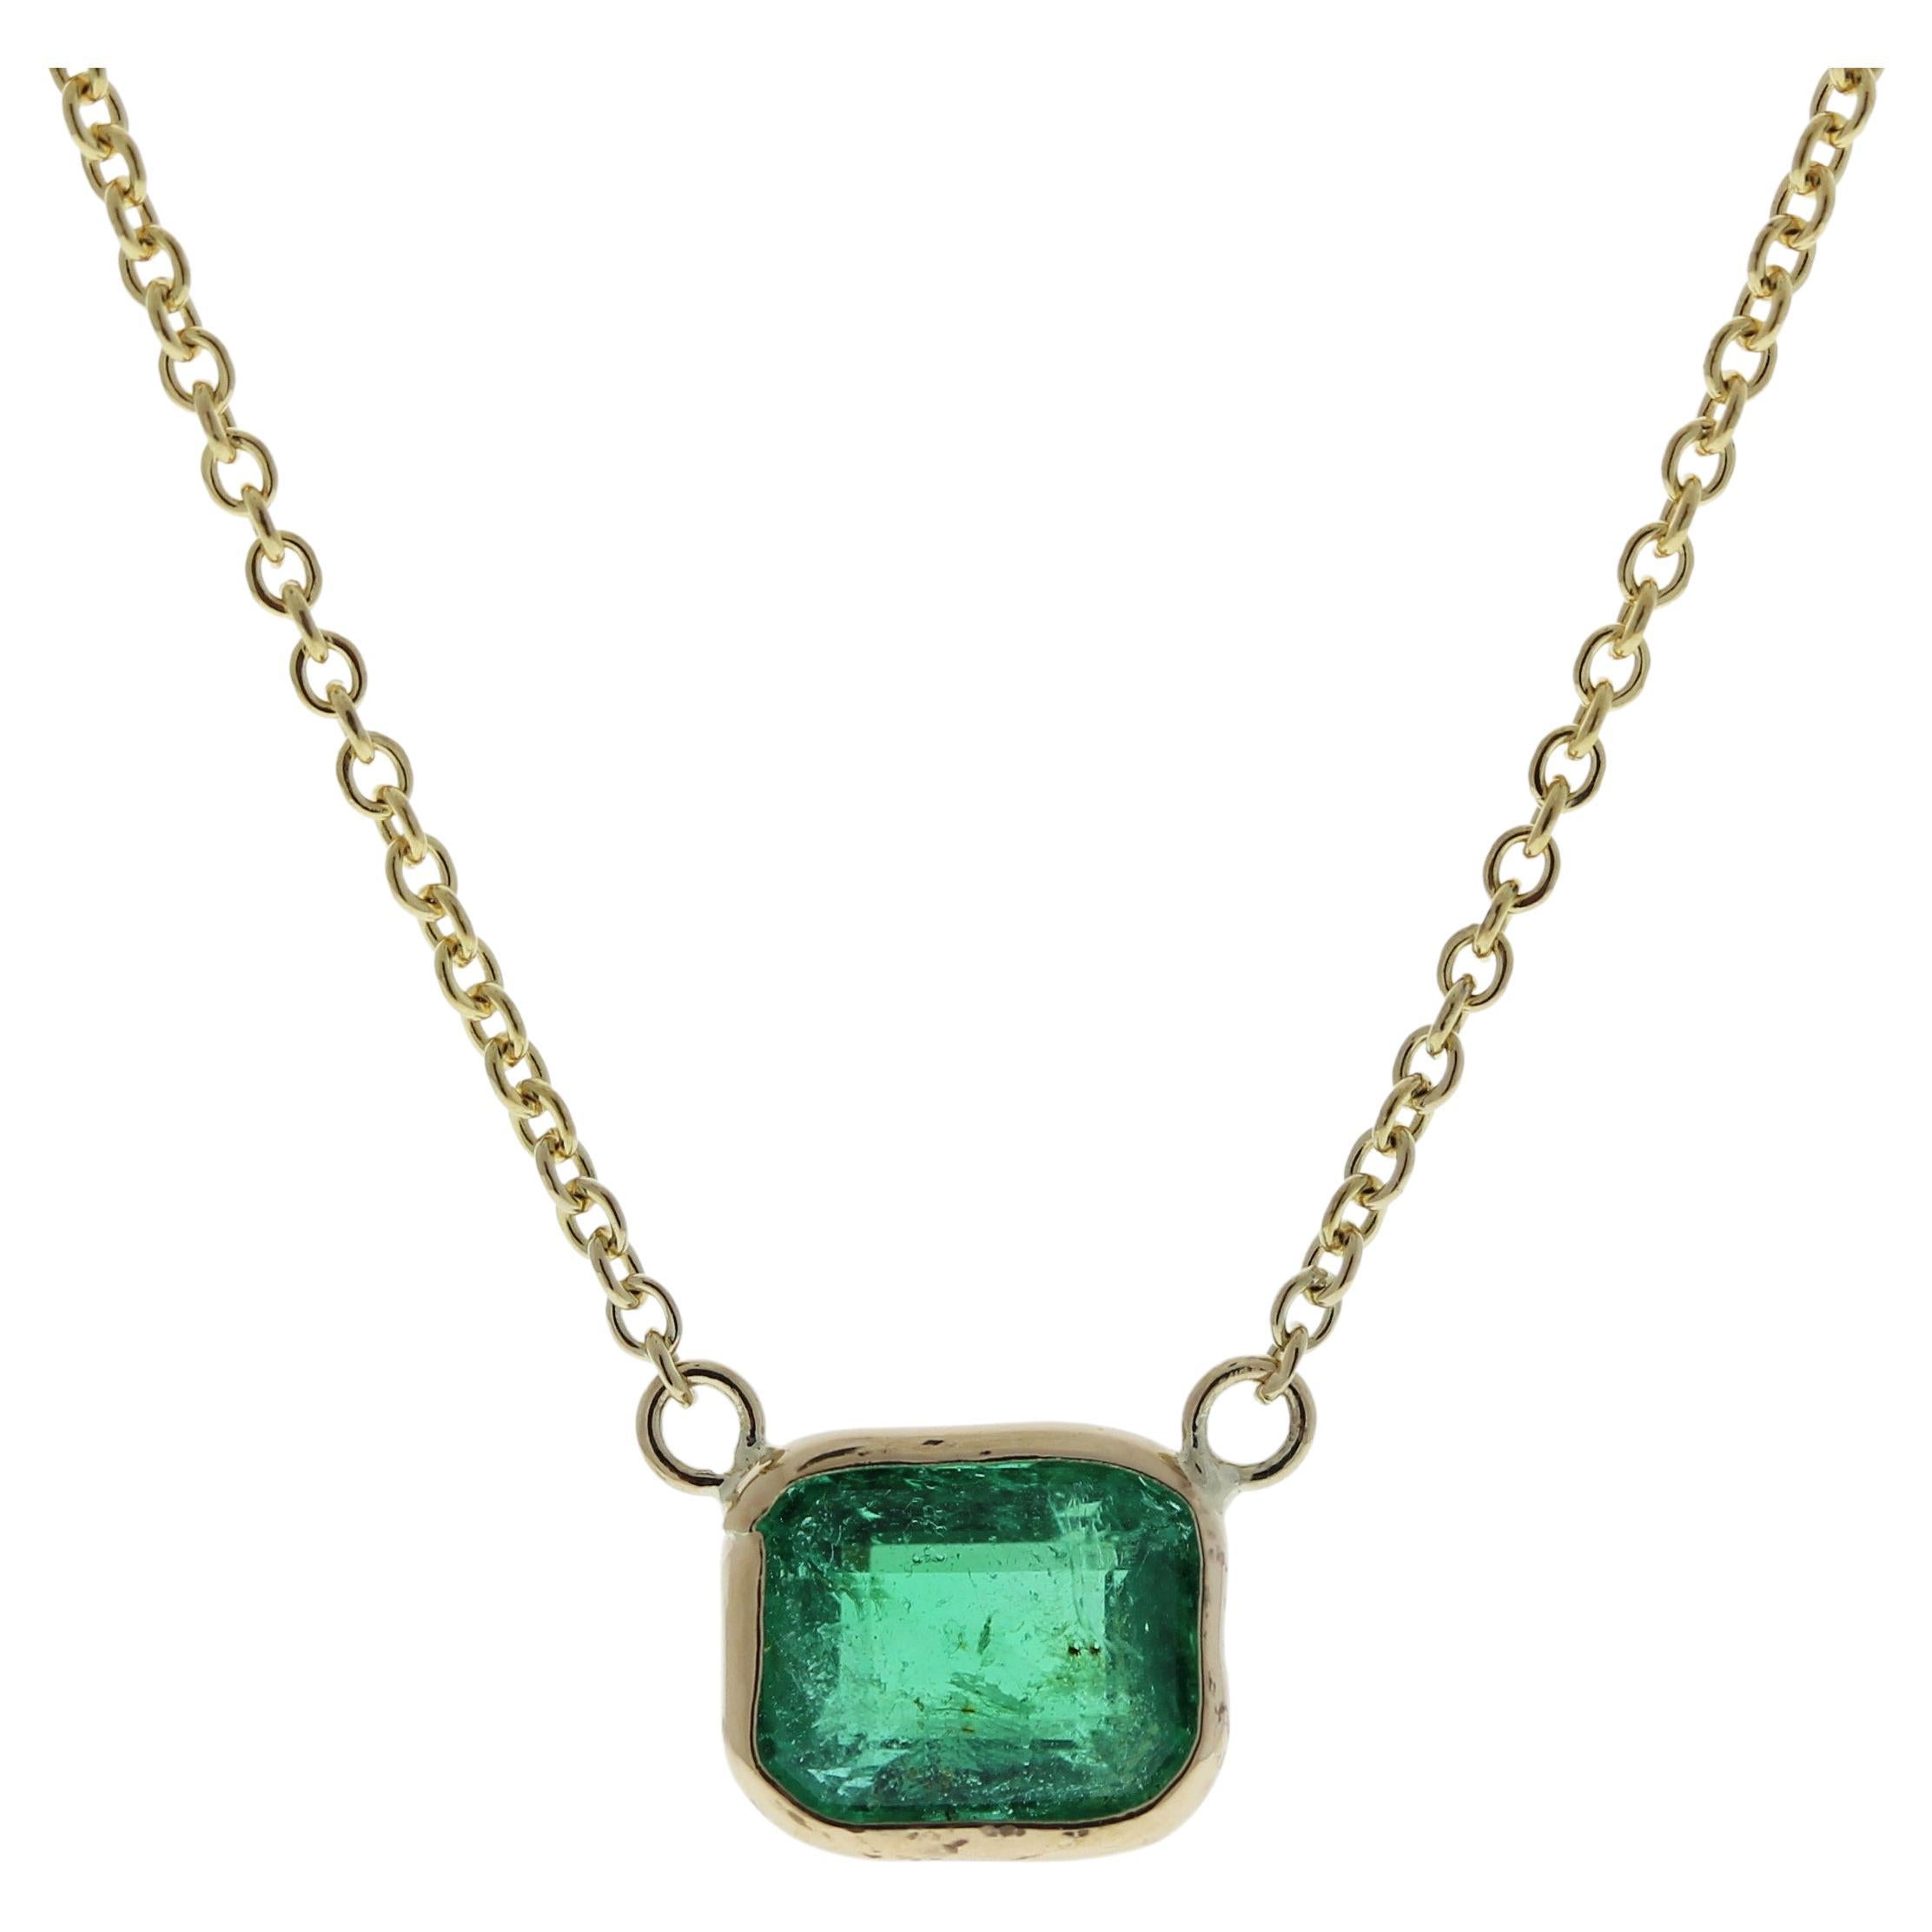 1.15 Carat Emerald Green Fashion Necklaces In 14k Yellow Gold For Sale